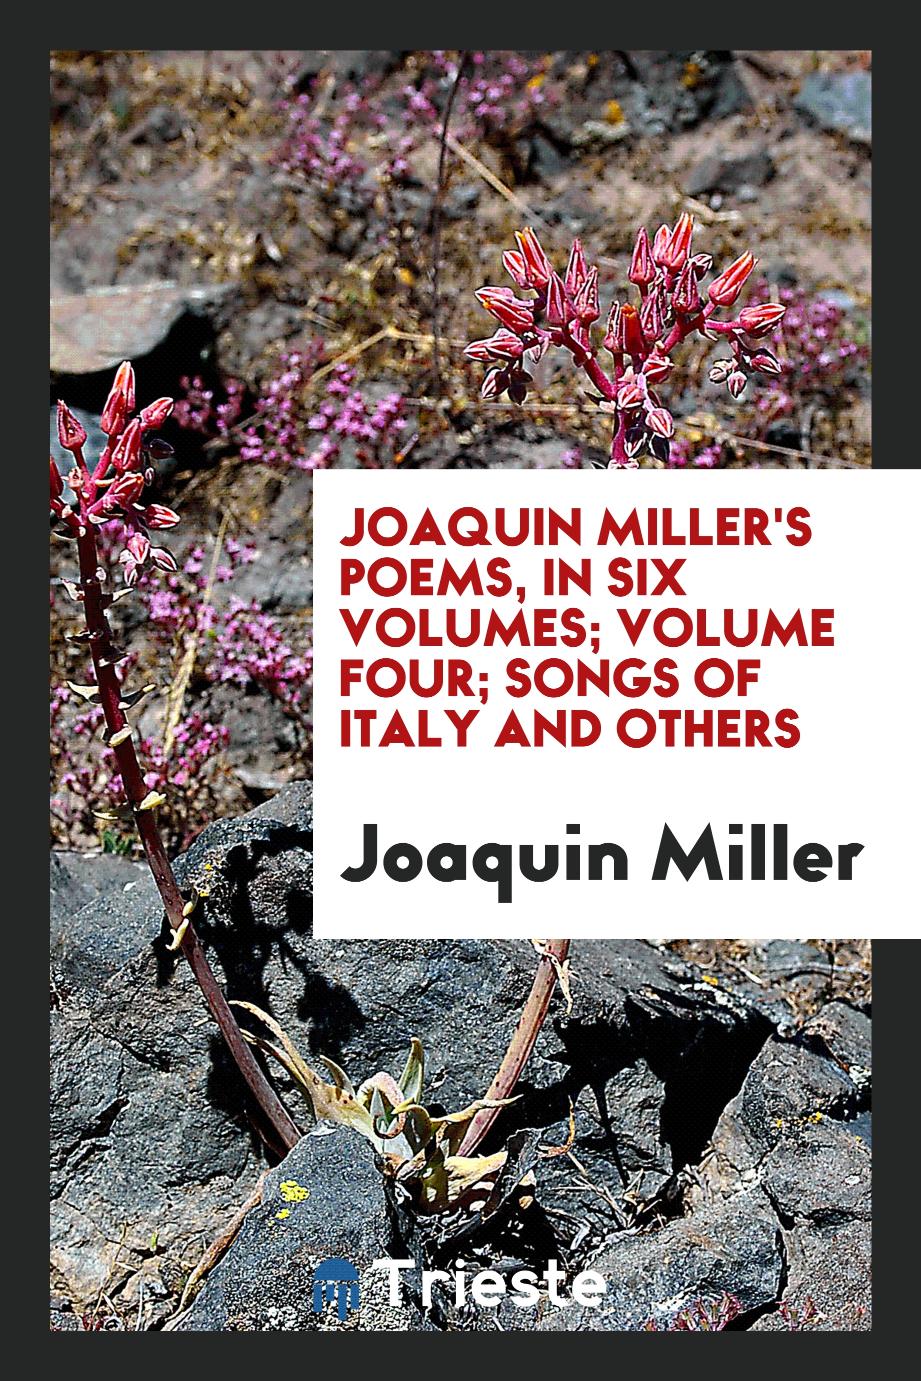 Joaquin Miller's poems, in six volumes; Volume four; Songs of Italy and others